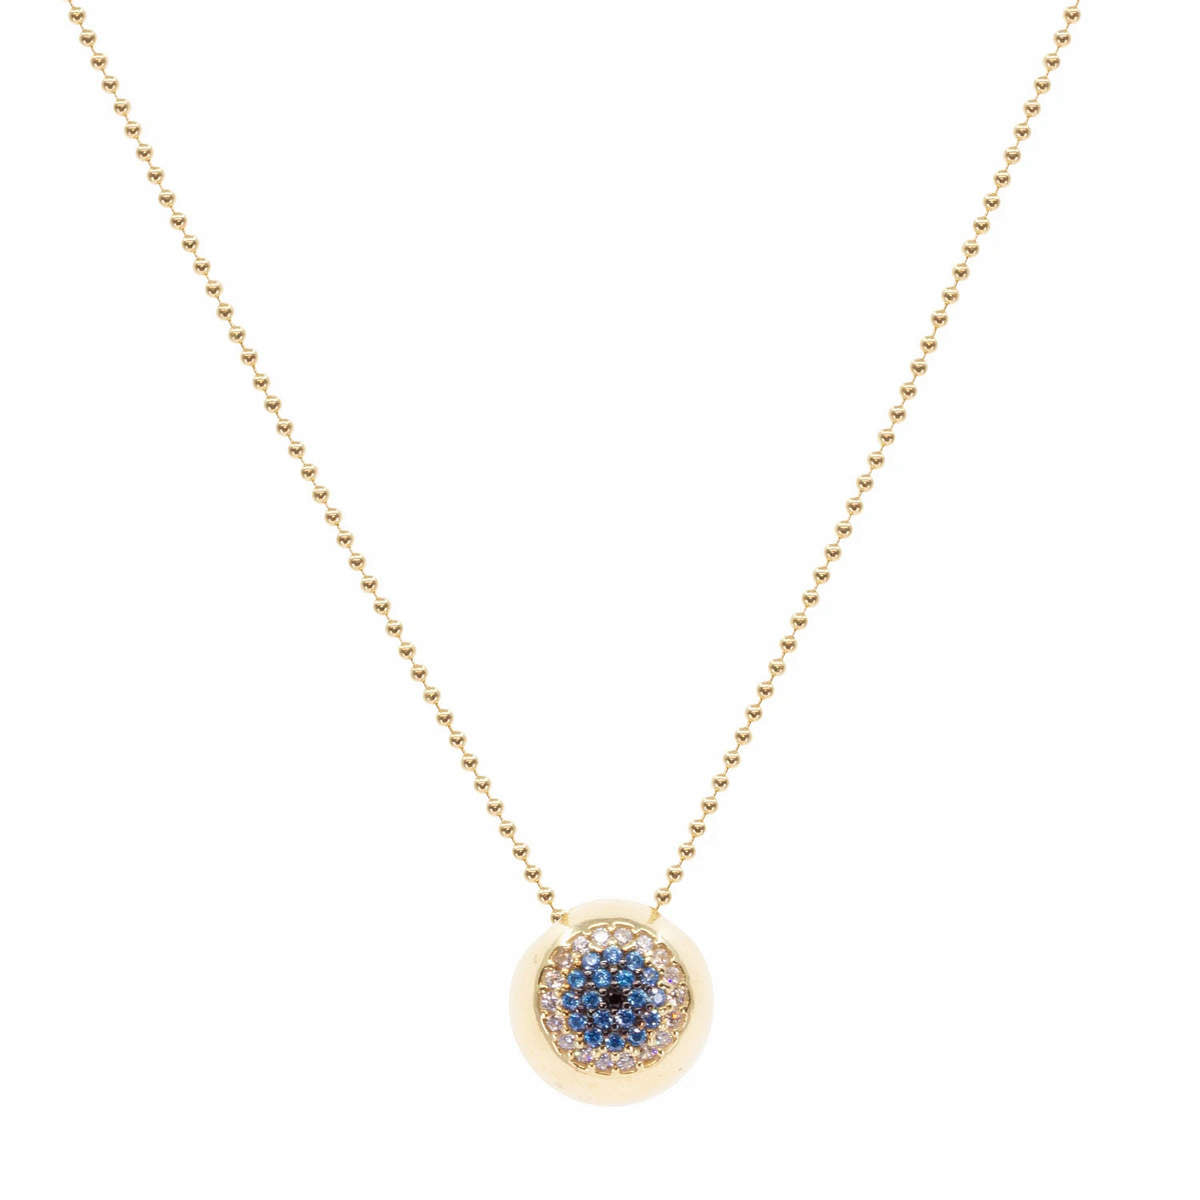 Wide-Eyed Crystal Pavé Necklace in Sapphire Blue